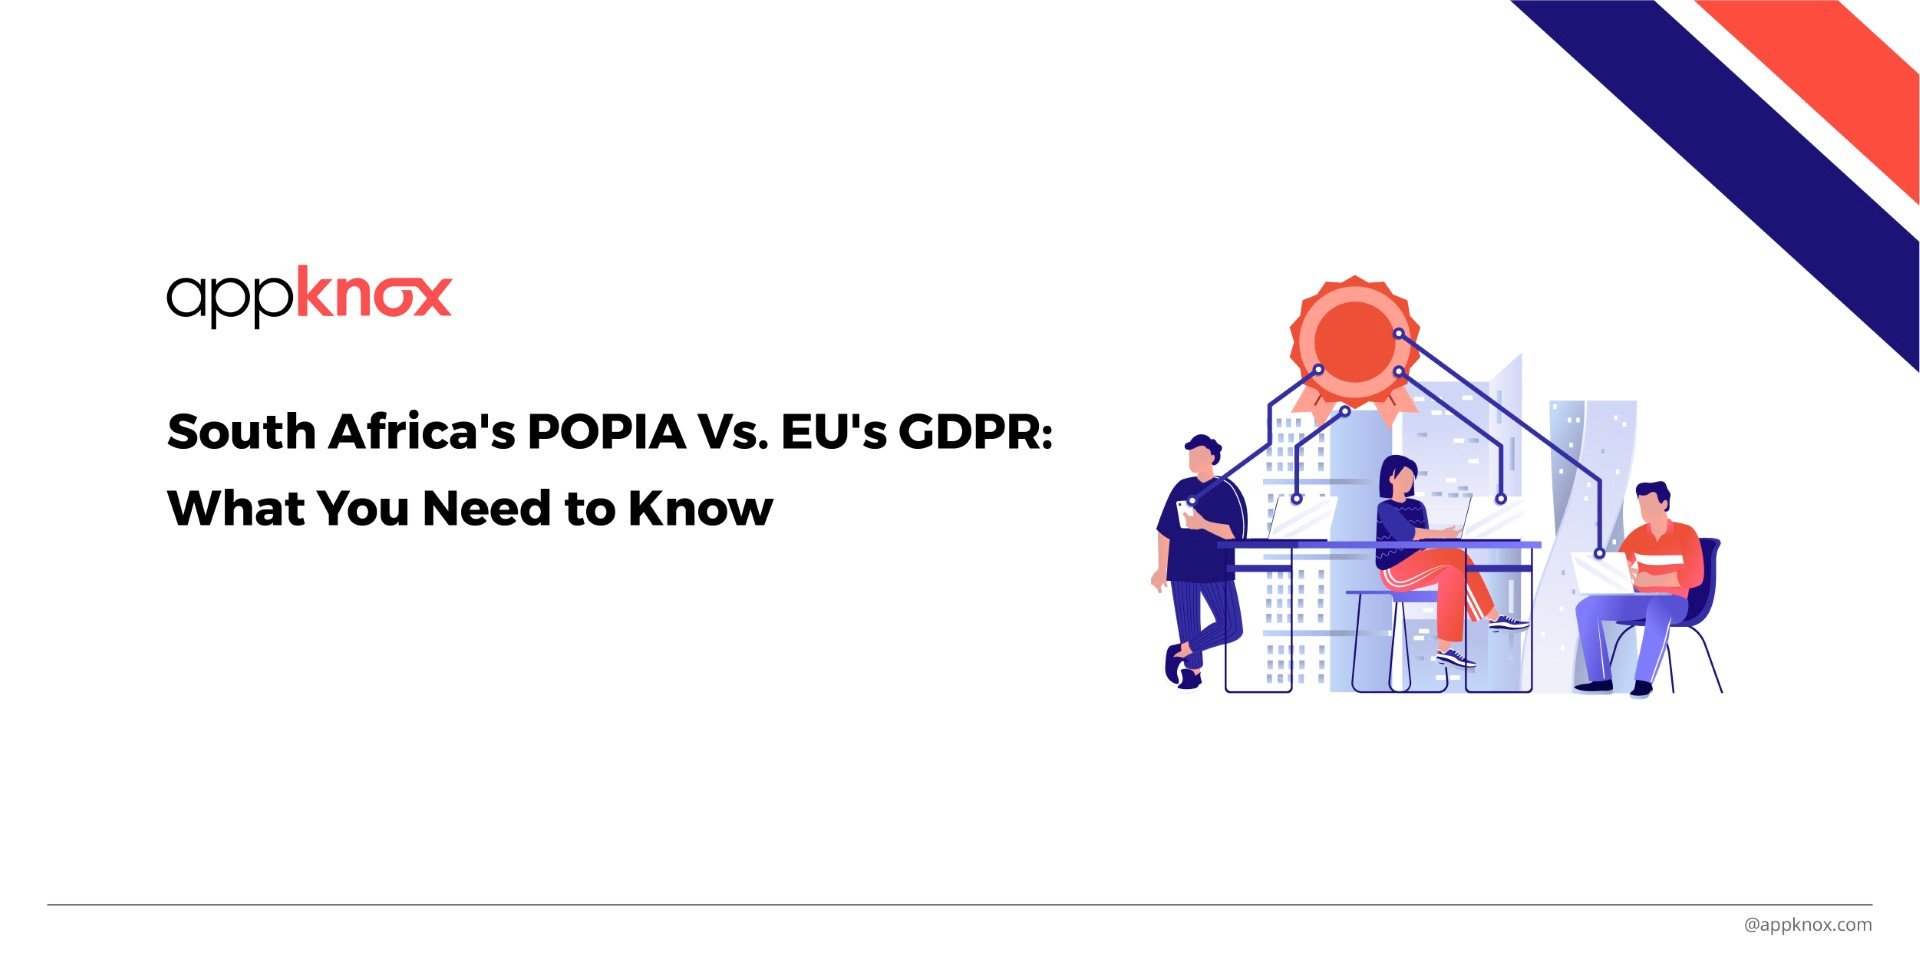 South Africa’s POPIA vs. EU’s GDPR: What You Need to Know 